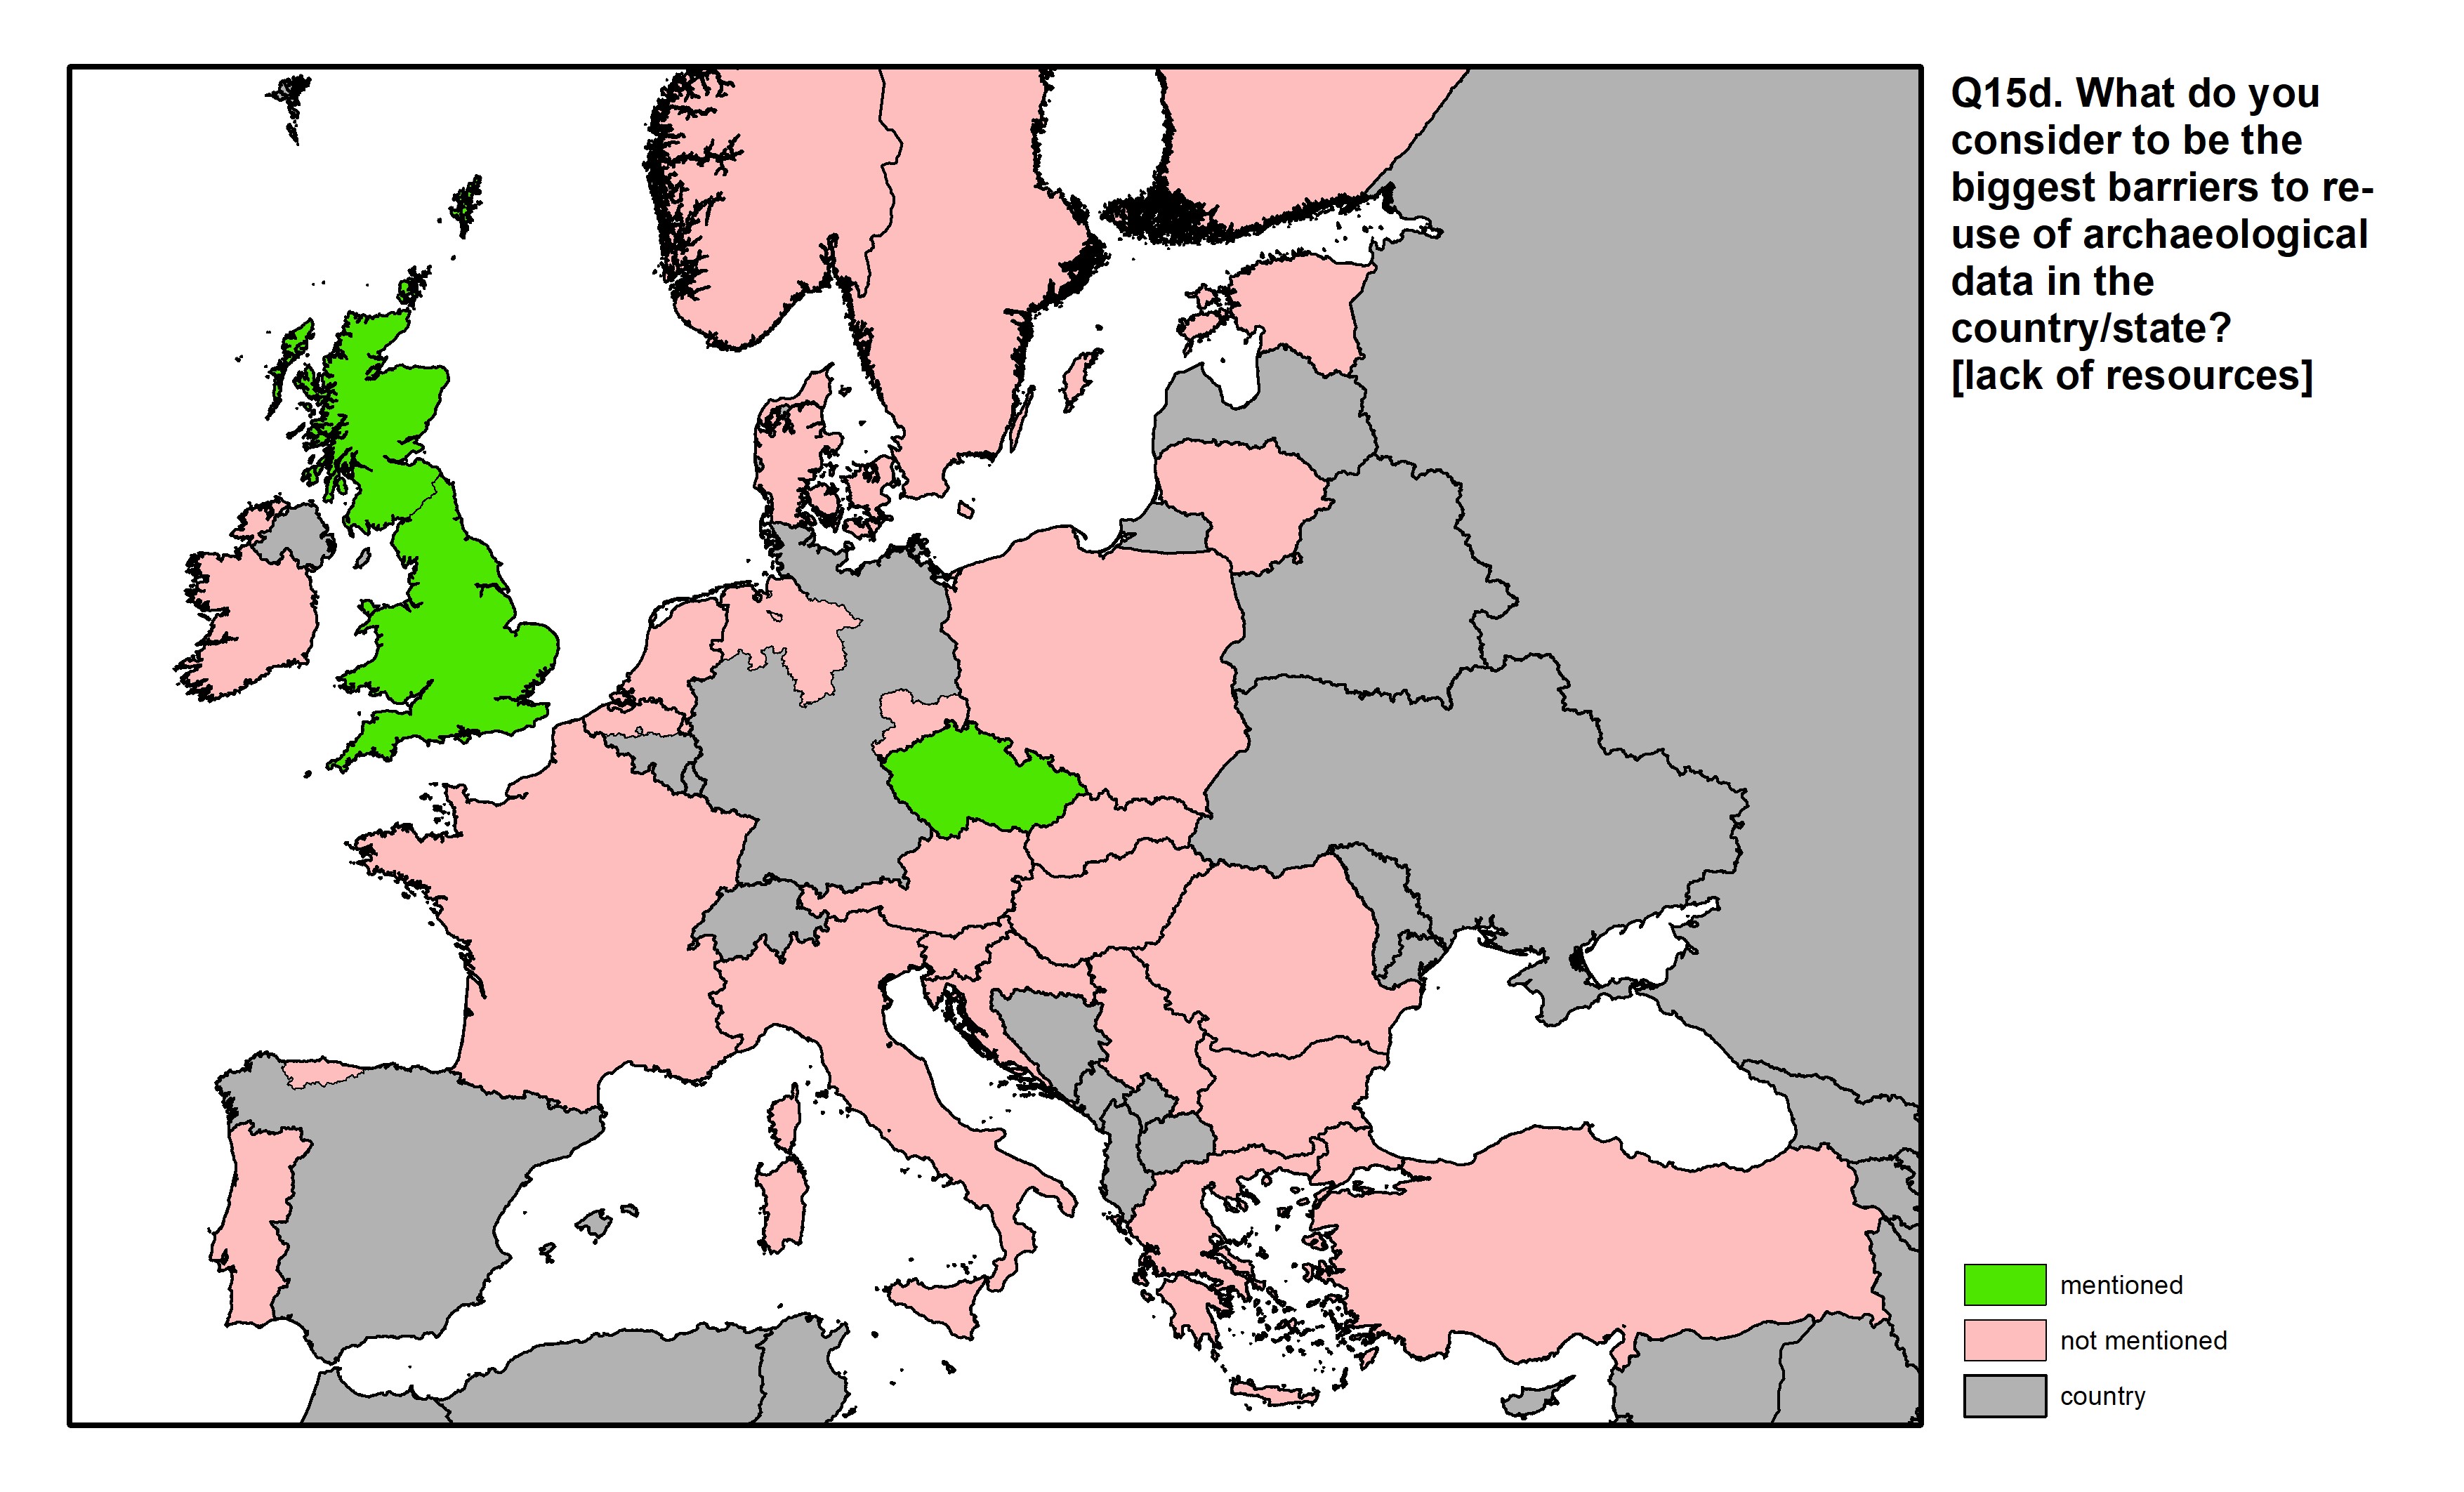 Figure 52: a map of Europe showing countries and regions in colour based on response rates to the survey question.